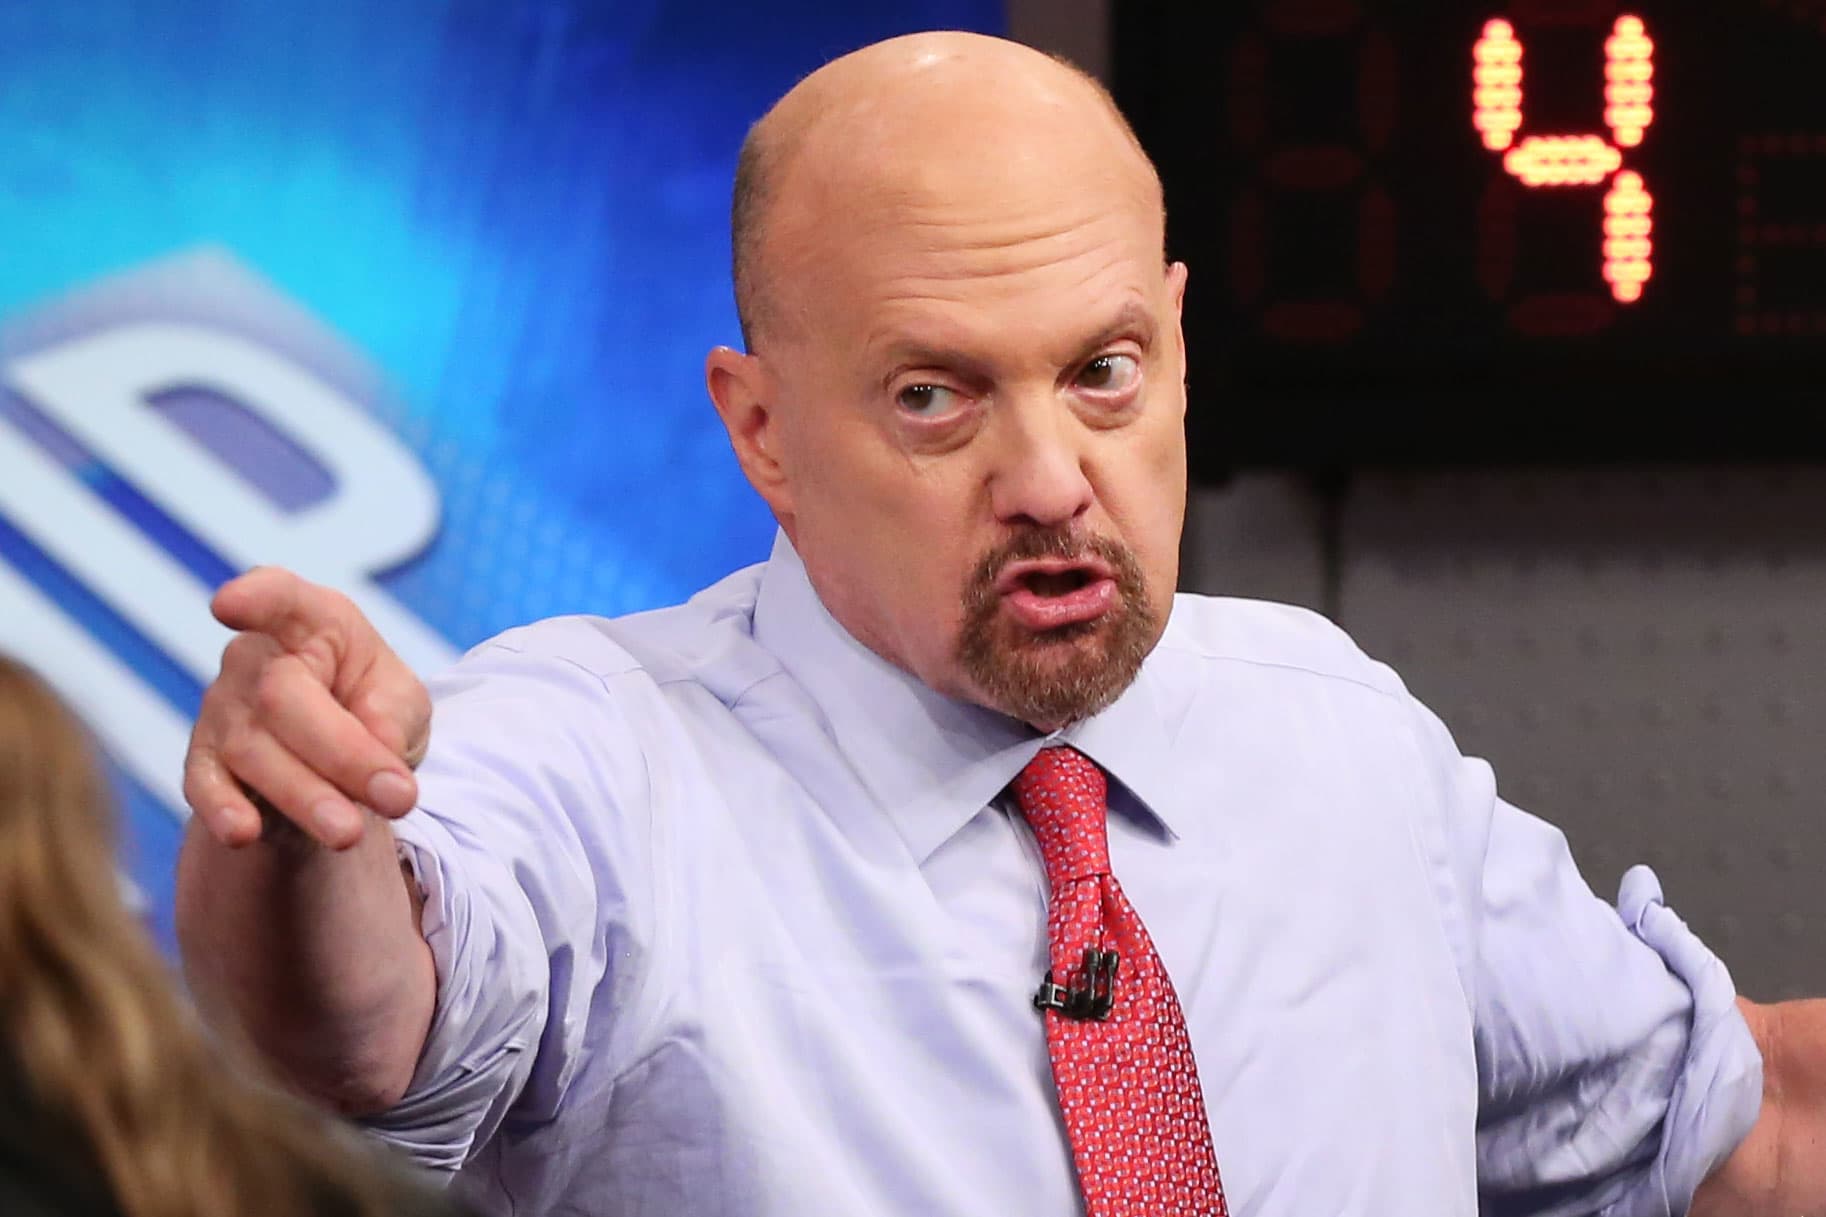 Jim Cramer's guide to investing: Never buy all at once